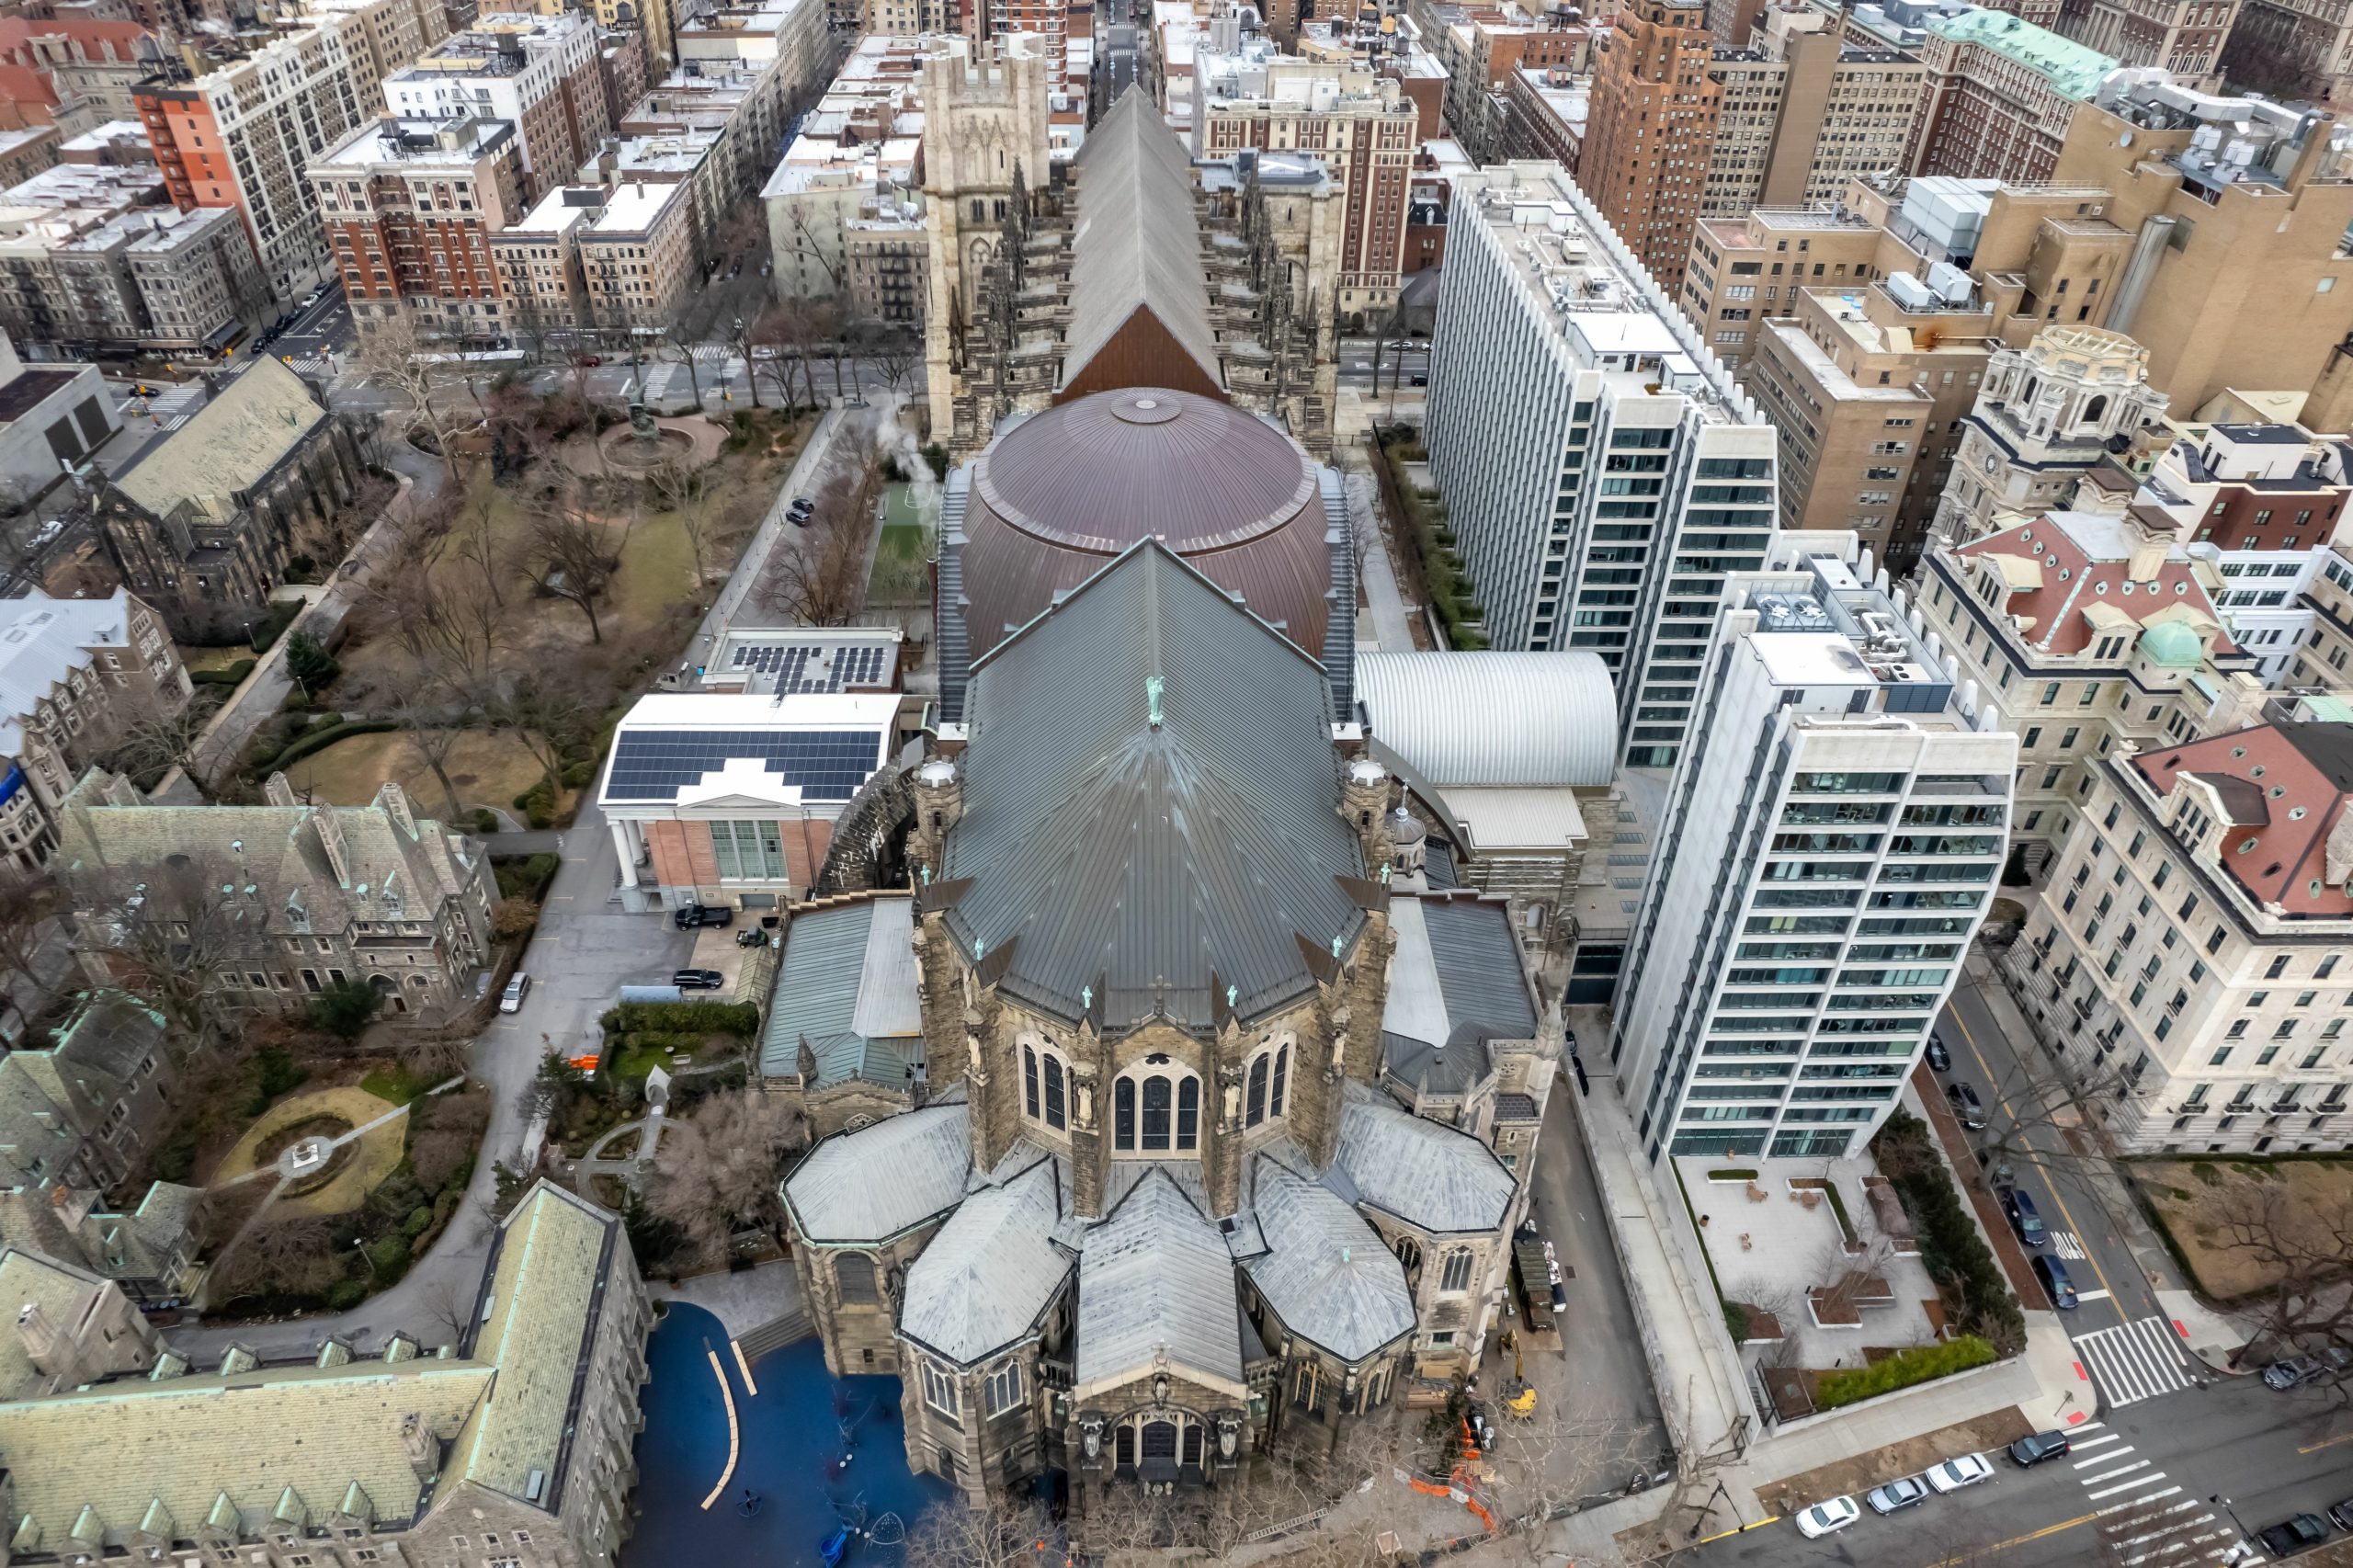 IPC Energizes Solar PV System at Landmark Cathedral of St. John the Divine